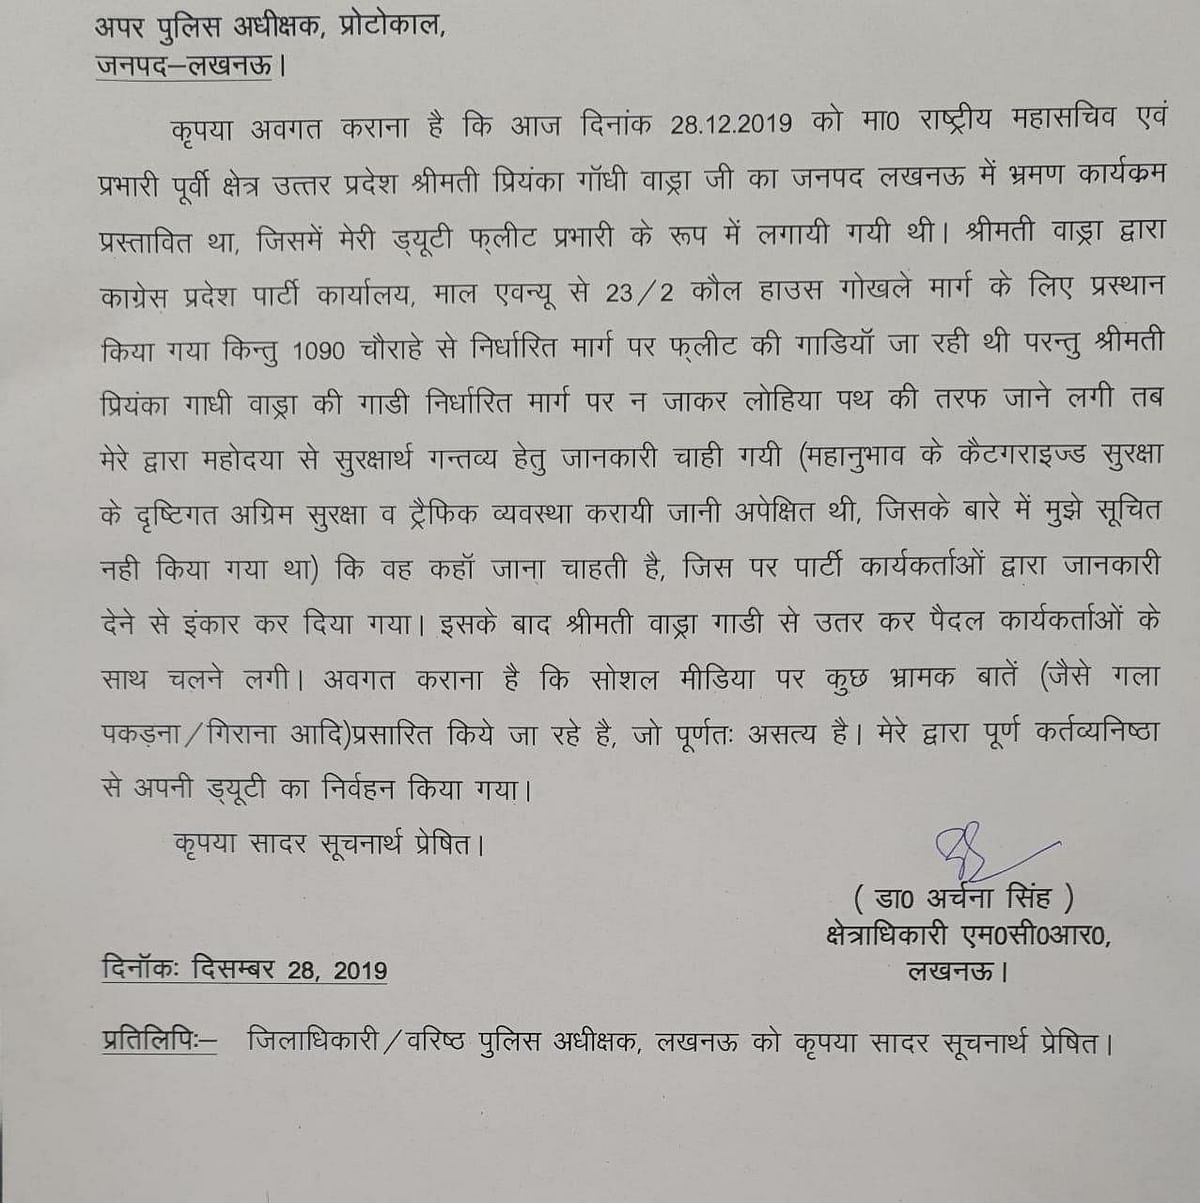 UP Police fined the owner of the two-wheeler for not wearing a helmet.